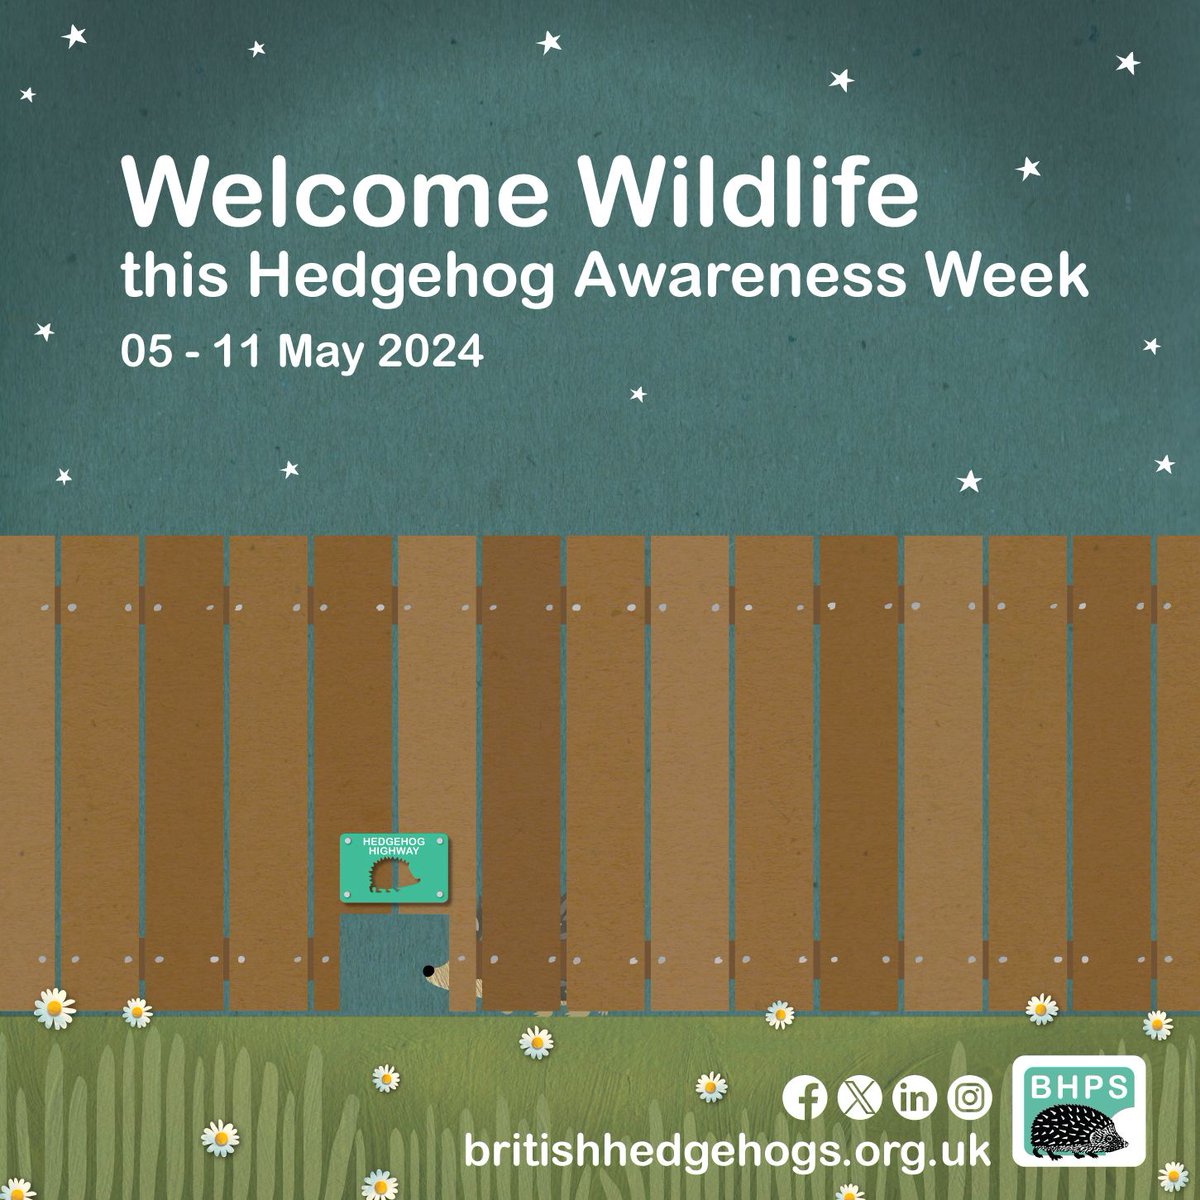 #hedgehogweek is almost here! We’ve got some brand-new infographics with tips on how to #welcomewildlife - designed & donated by the brilliant @TFIUnmown – just perfect for sharing & showing your support for #hedgehogs! 🦔 Follow us so you don’t miss out...!